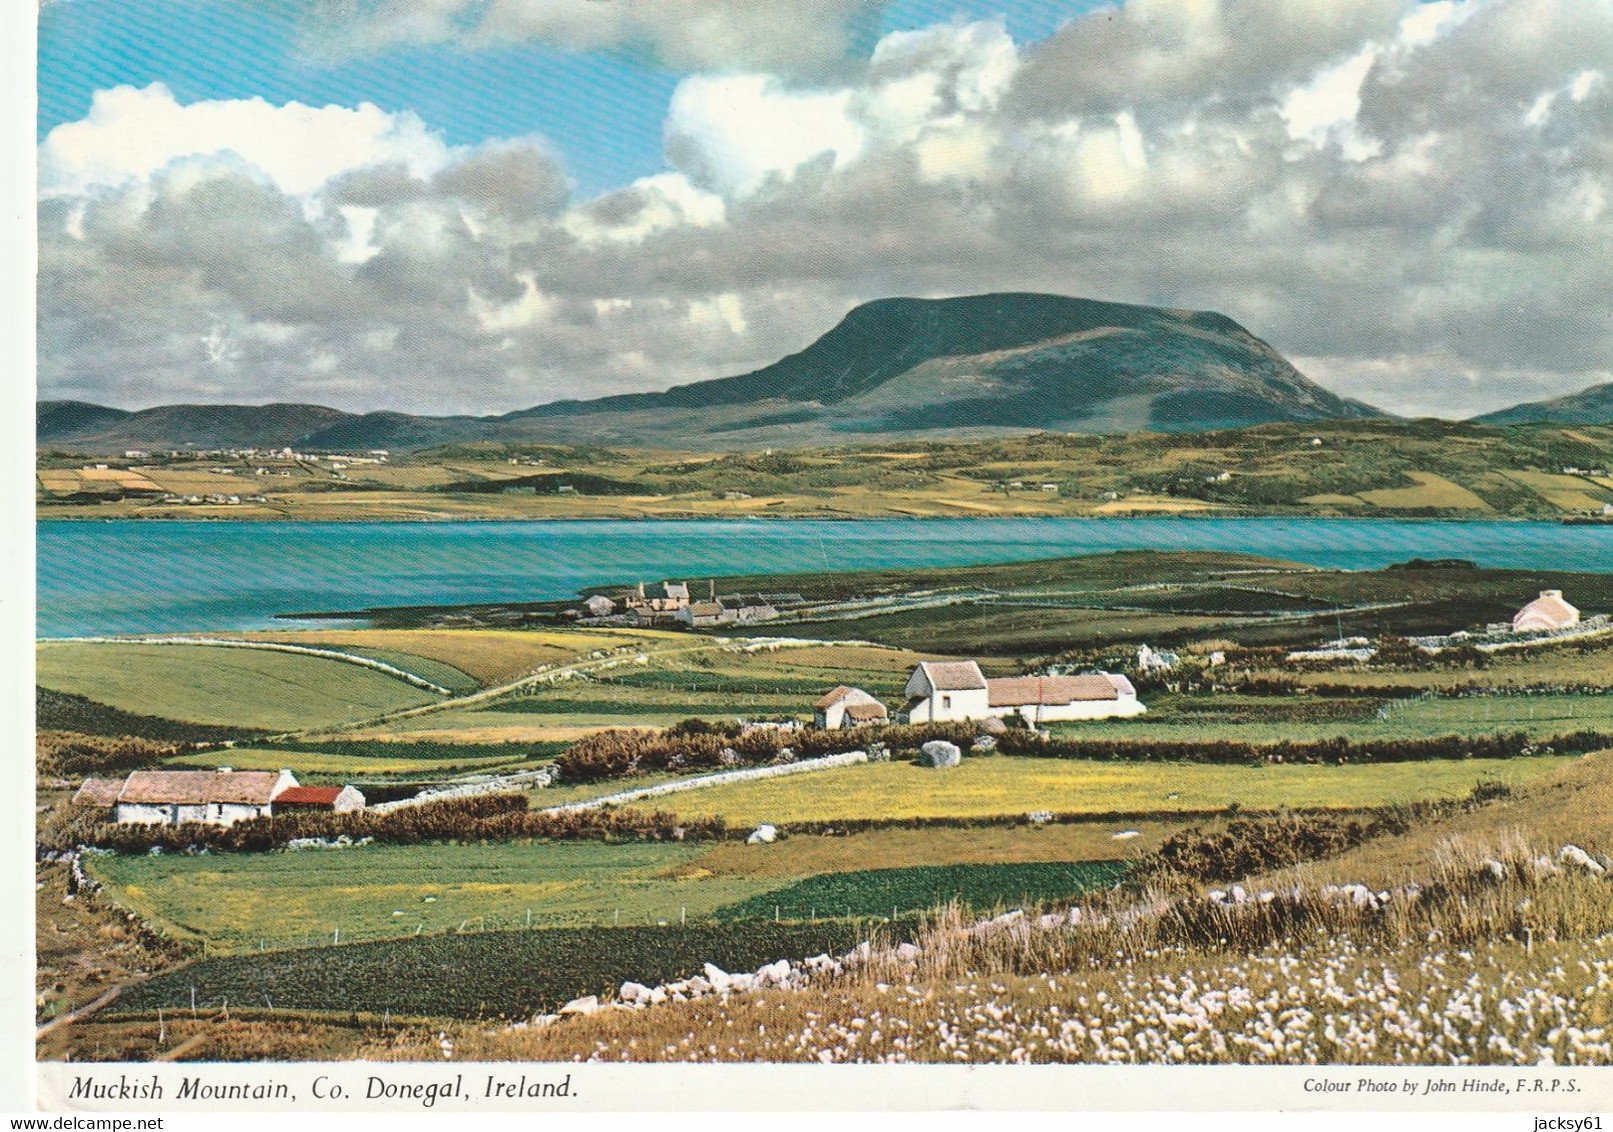 Muckish Mountain, Co. Donegal, Ireland - Donegal